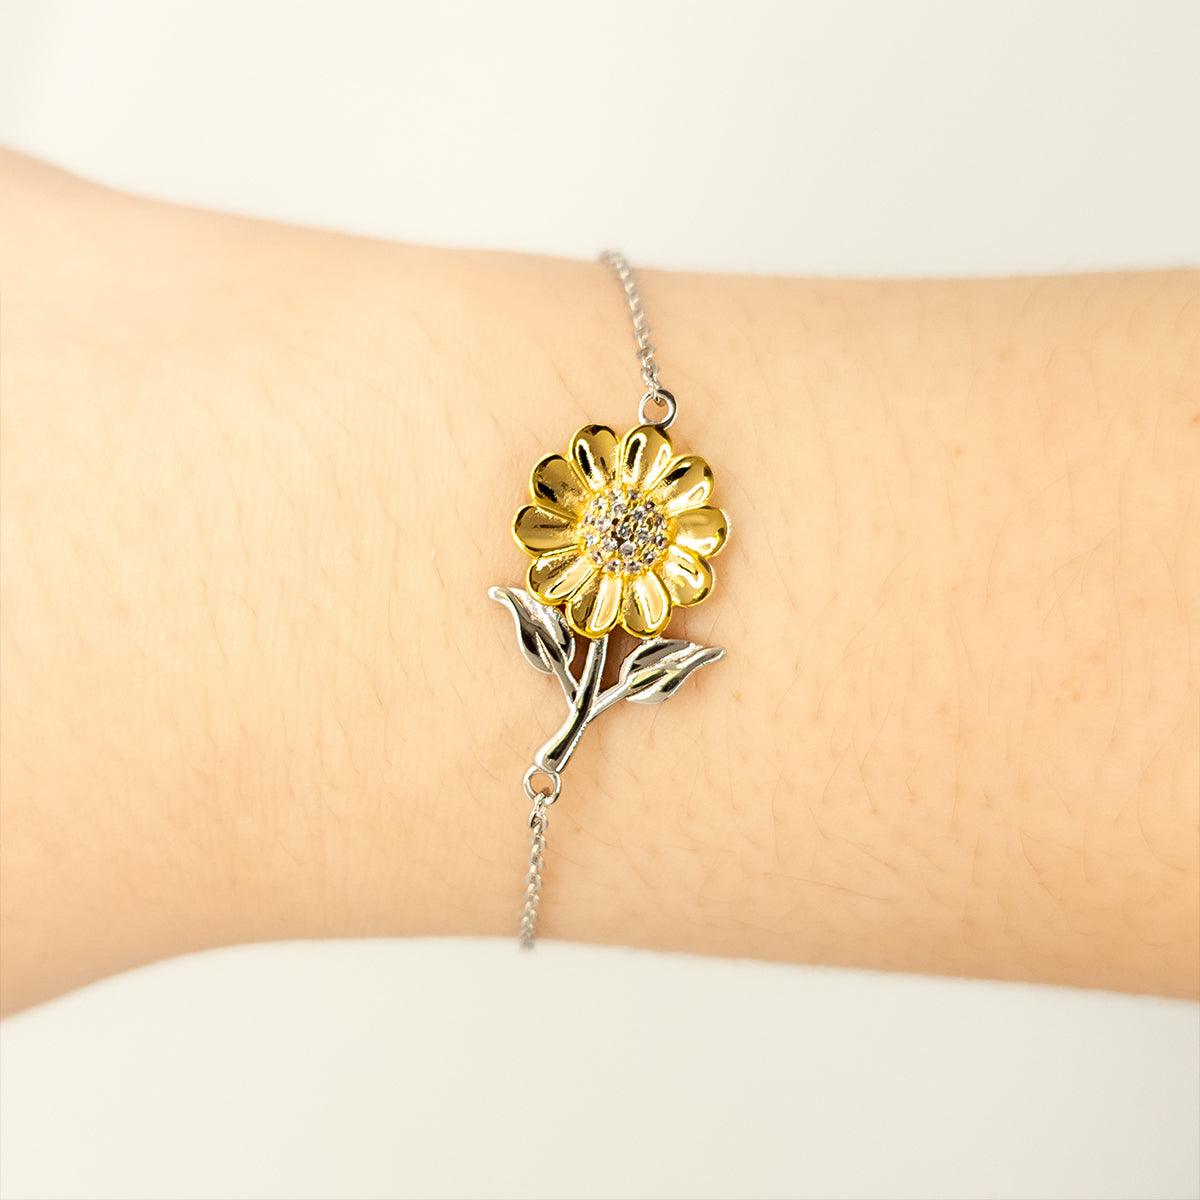 Sunflower Bracelet for Stepdad Present, Stepdad Always follow your dreams, never forget how amazing you are, Stepdad Birthday Christmas Gifts Jewelry for Girls Boys Teen Men Women - Mallard Moon Gift Shop